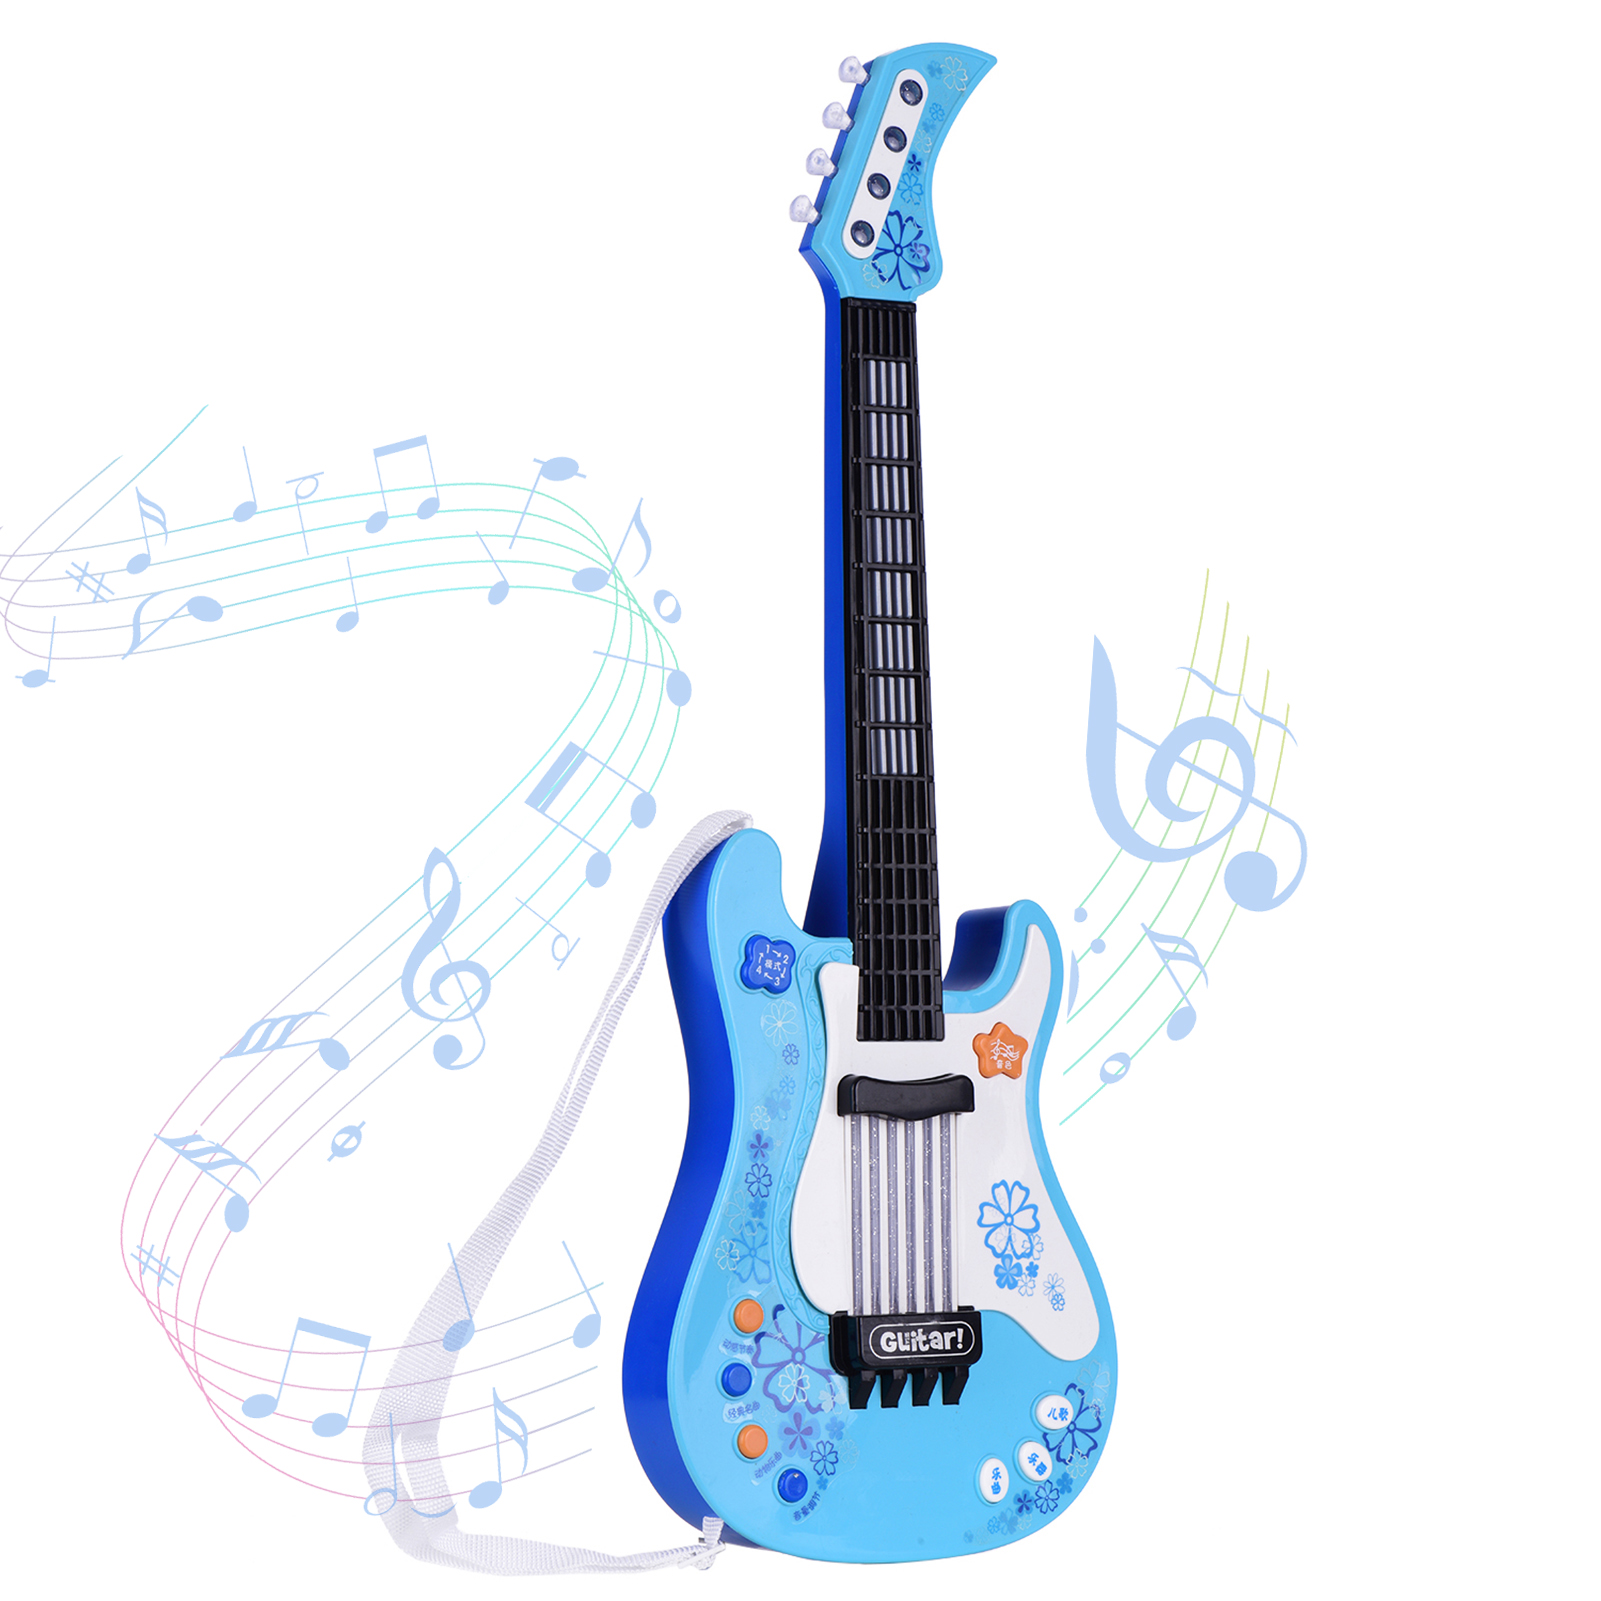 Maboto Kids Little Guitar with Rhythm Lights and Sounds Fun Educational ...